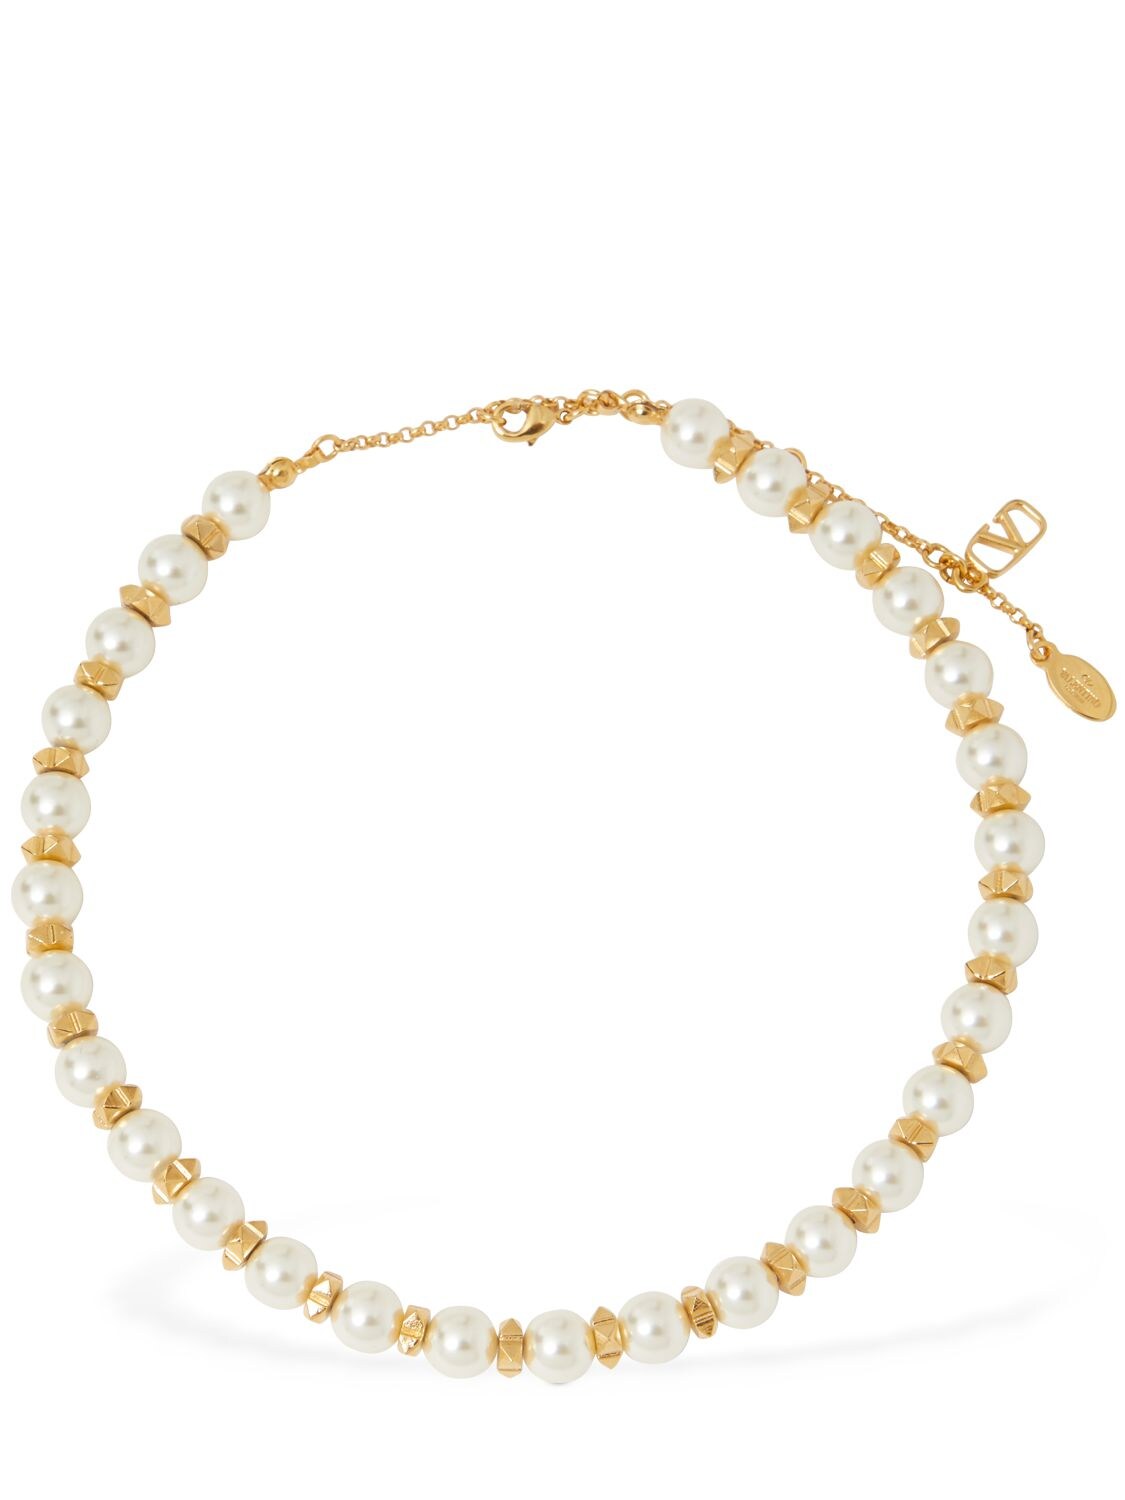 Image of Faux Pearl & Rockstuds Collar Necklace